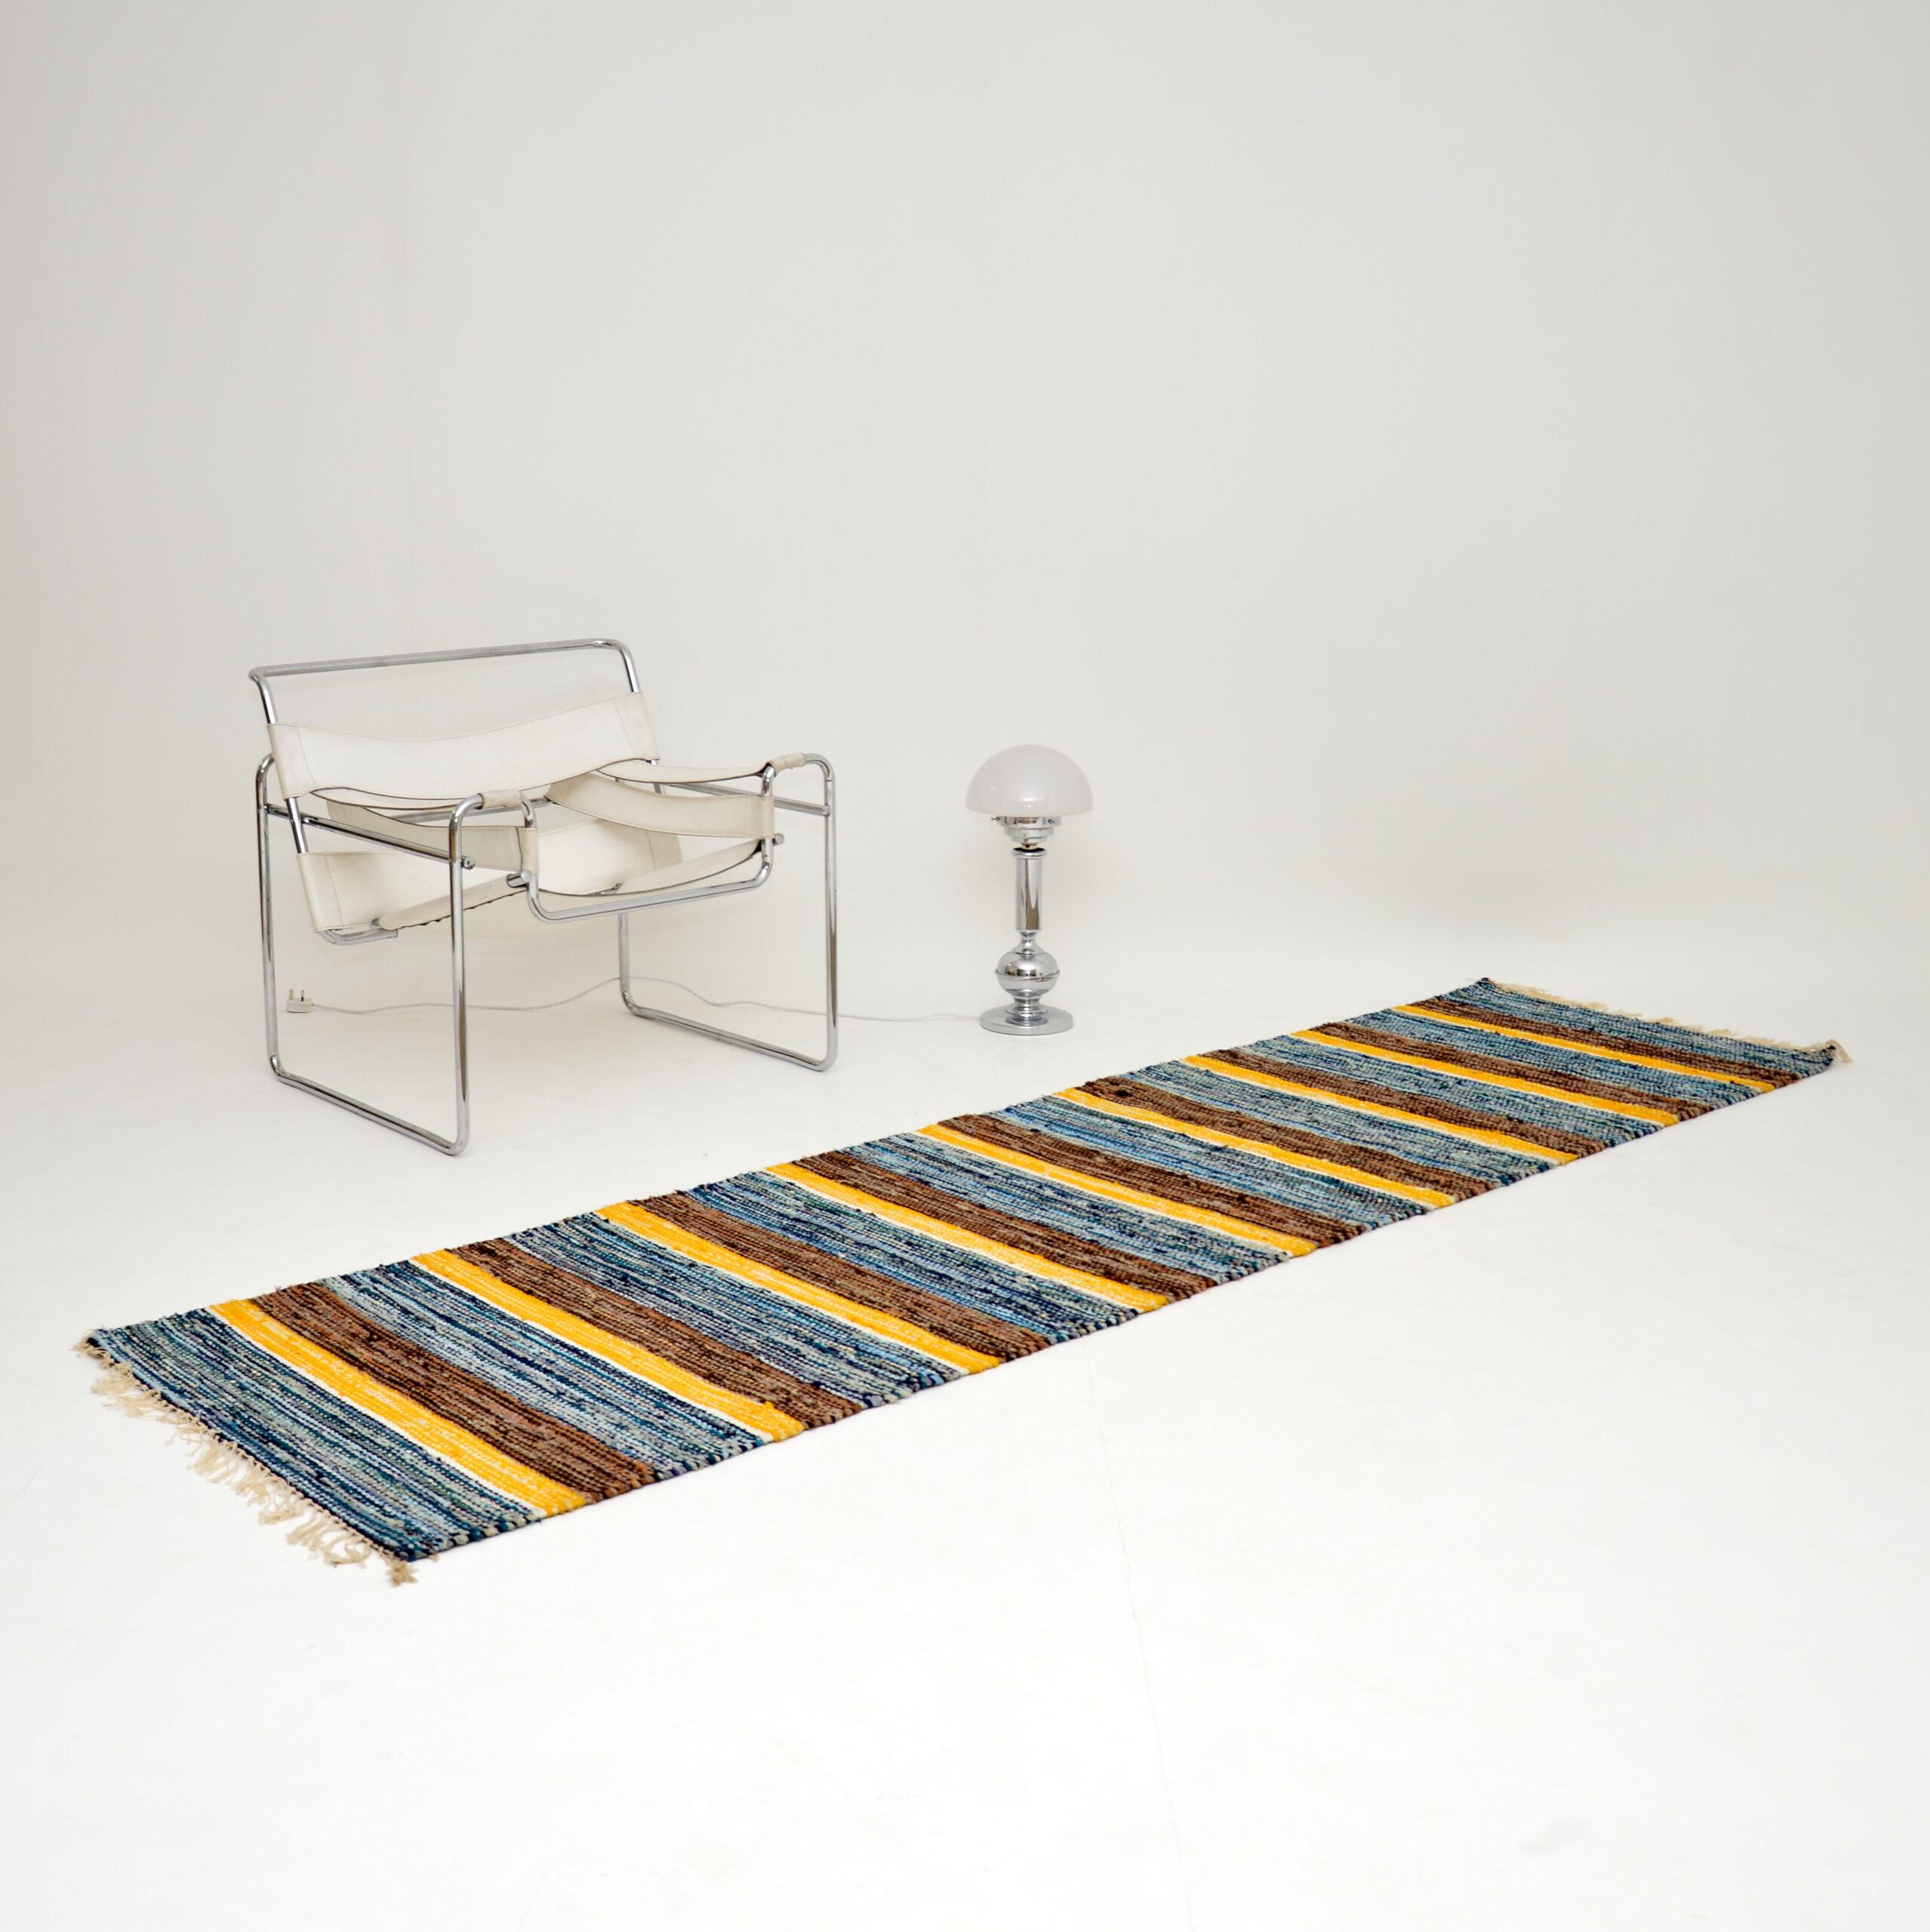 A beautiful vintage rug, this was made in Finland in the 1960s. It is very long and narrow, perfect for an entry or passage way. It’s woven from high quality wool and has many beautiful colors. This is in very good condition, with just some minor